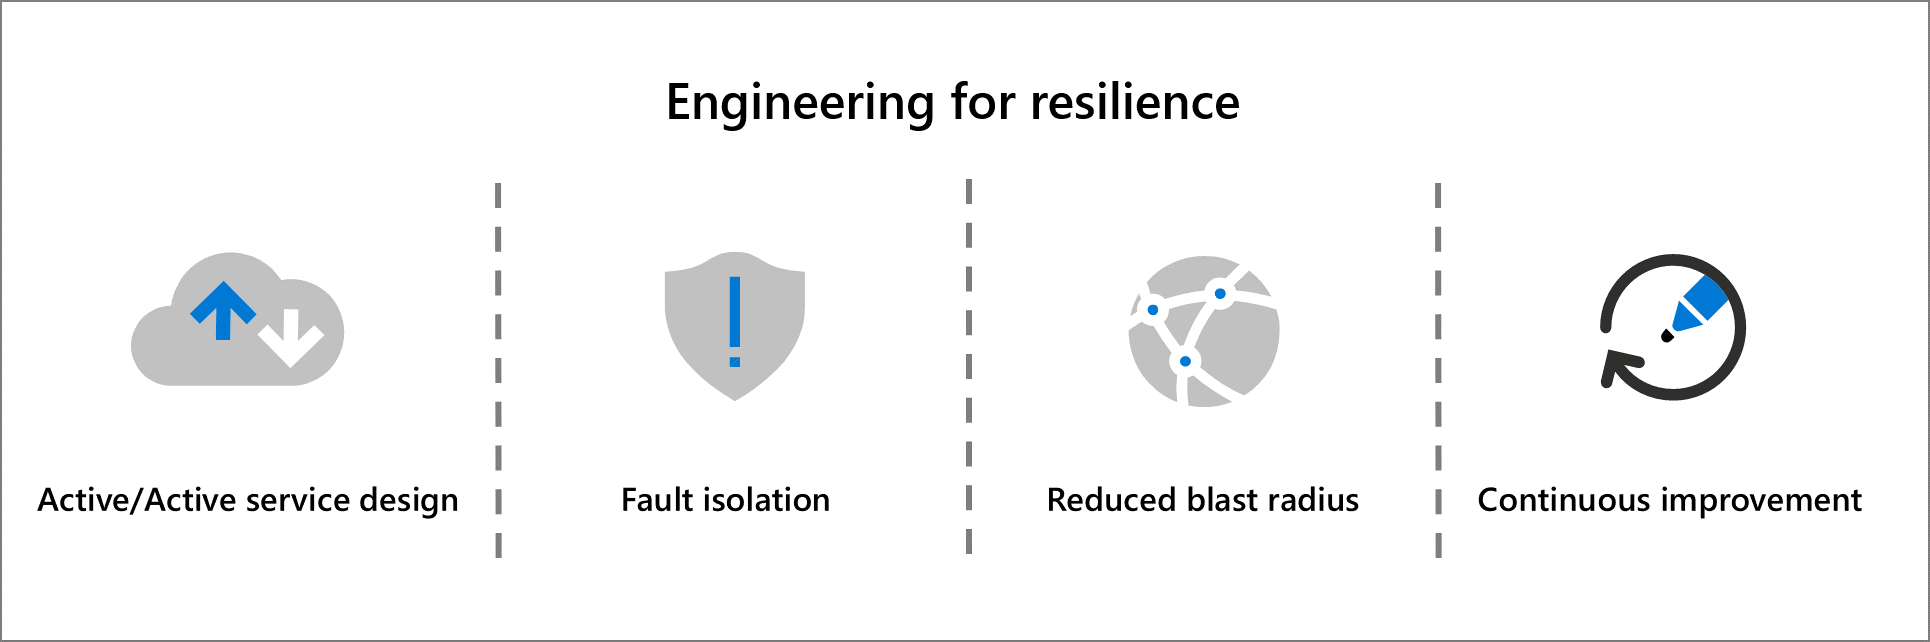 A graphic representation of engineering for resilience principles - active/active service design, fault isolation, reduced blast radius, and continuous improvement